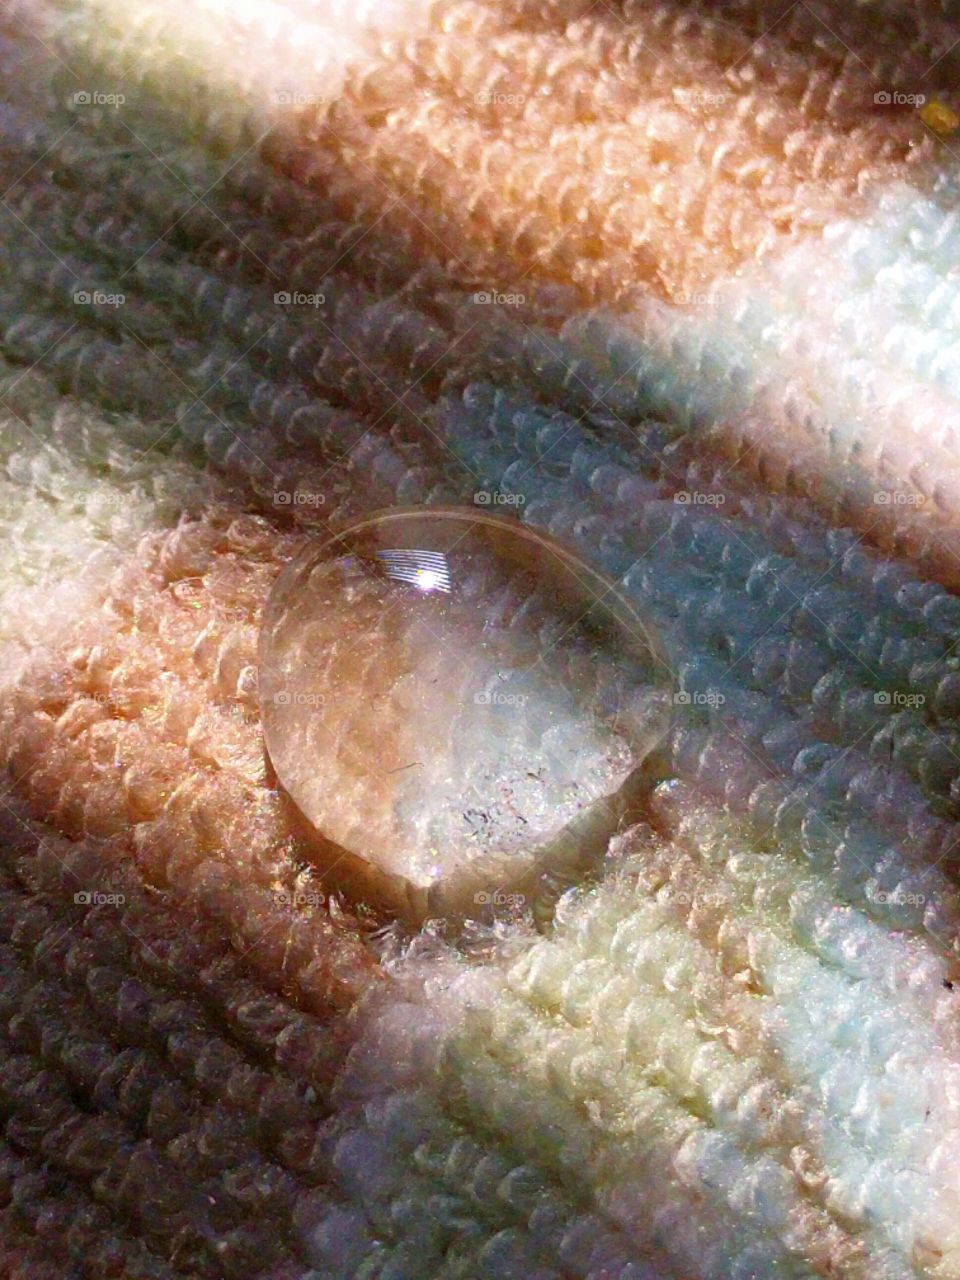 Large Droplet on Drying Towel